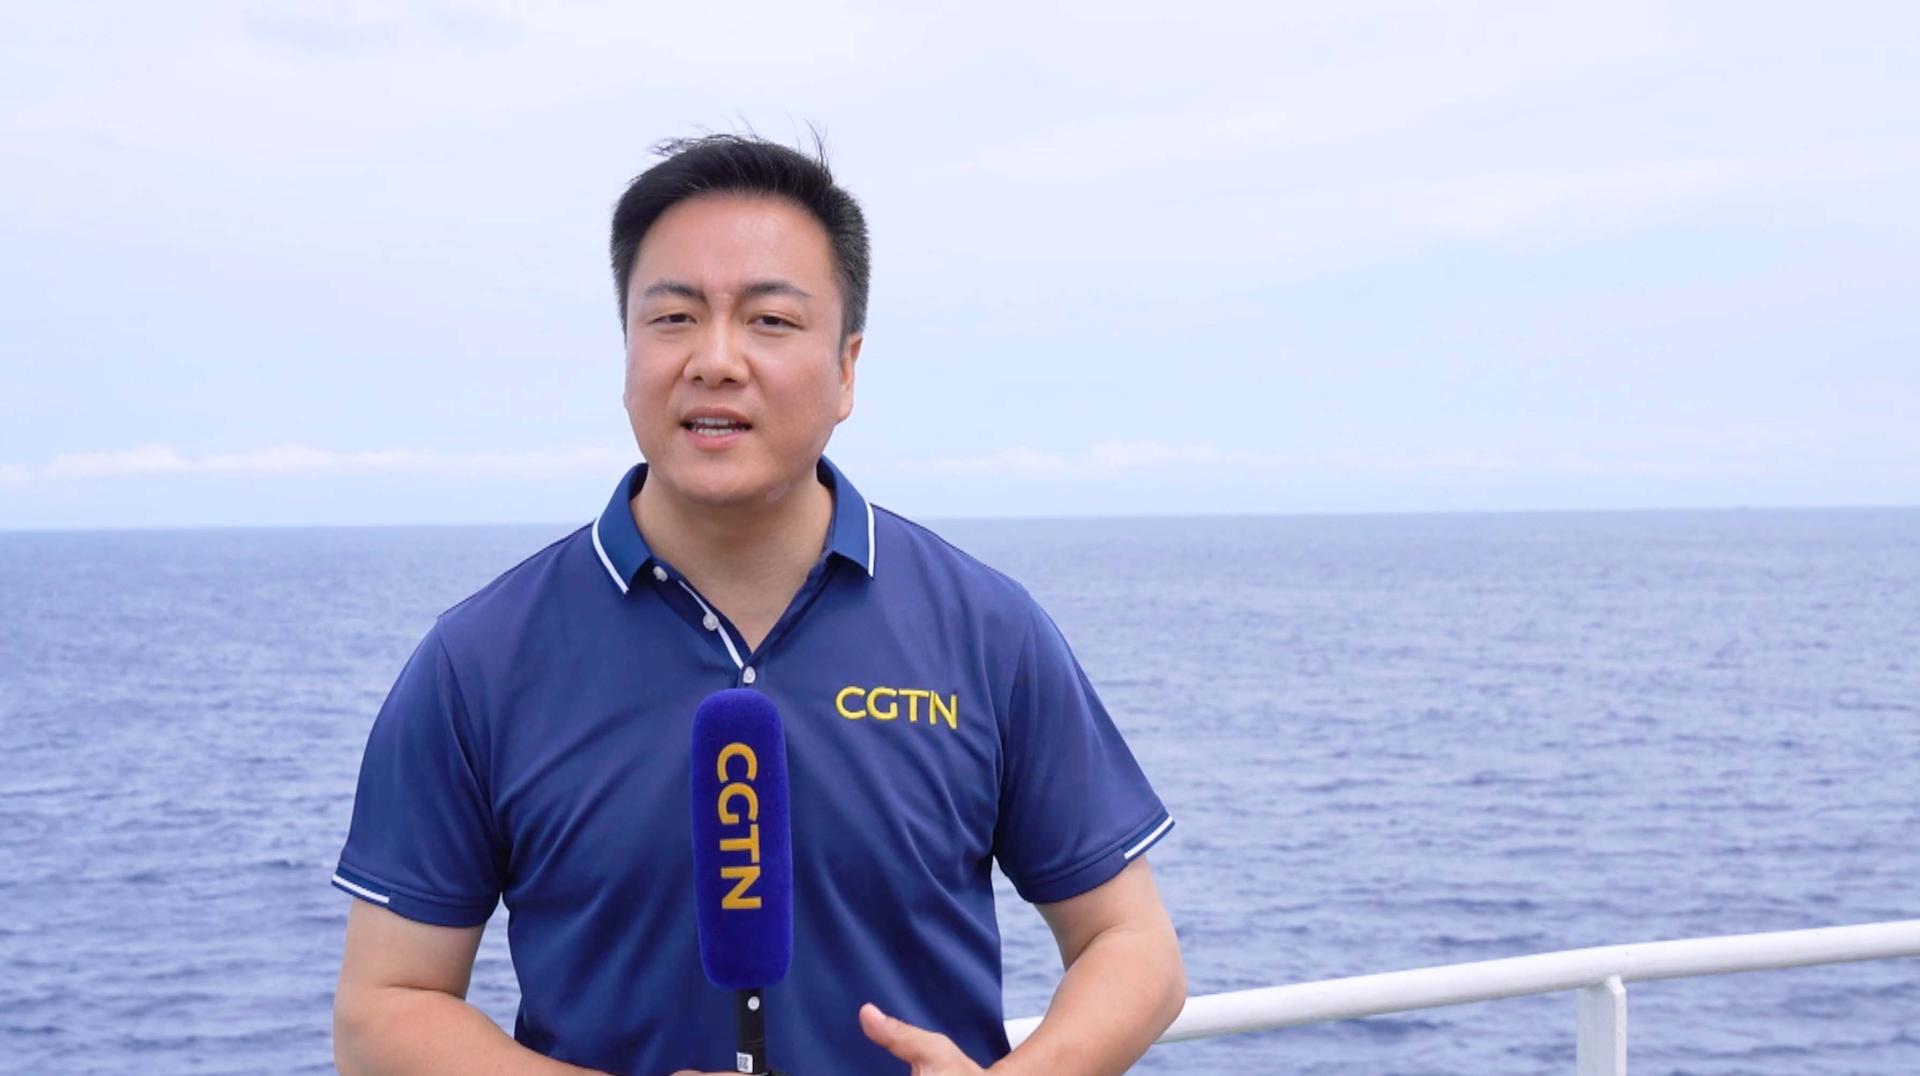 CGTN reporter visits sites of Philippines’ provocations in S China Sea [Video]